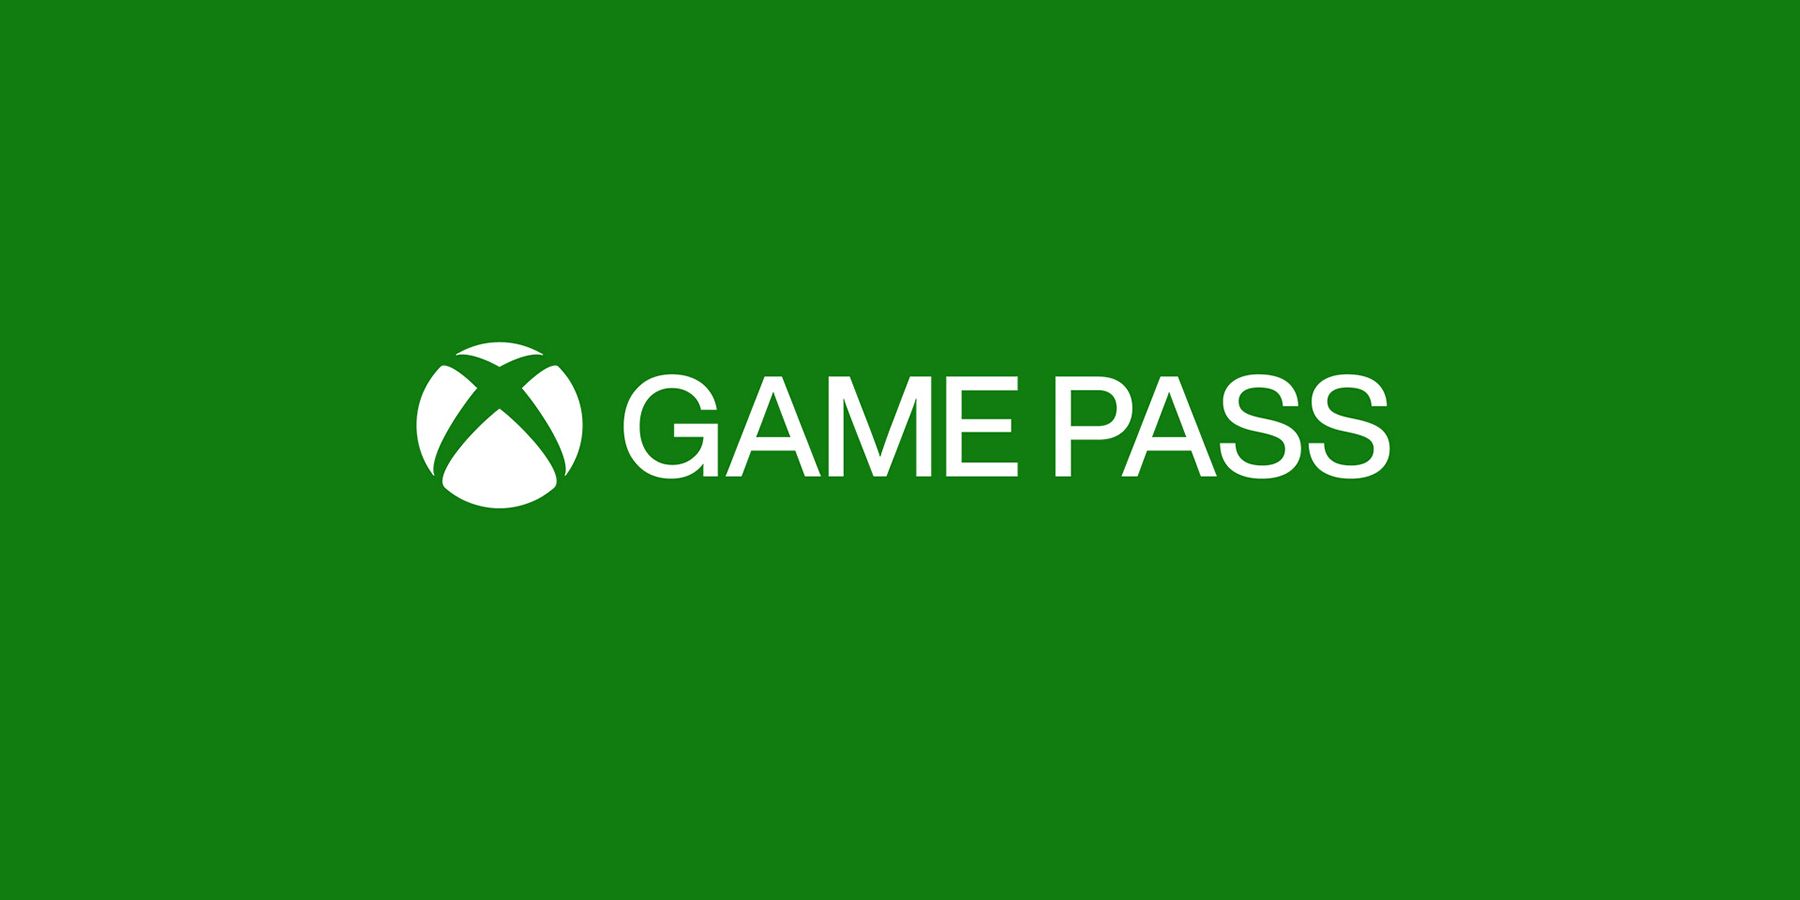 Xbox game pass Core is launching Sep 1st, will replace Xbox live